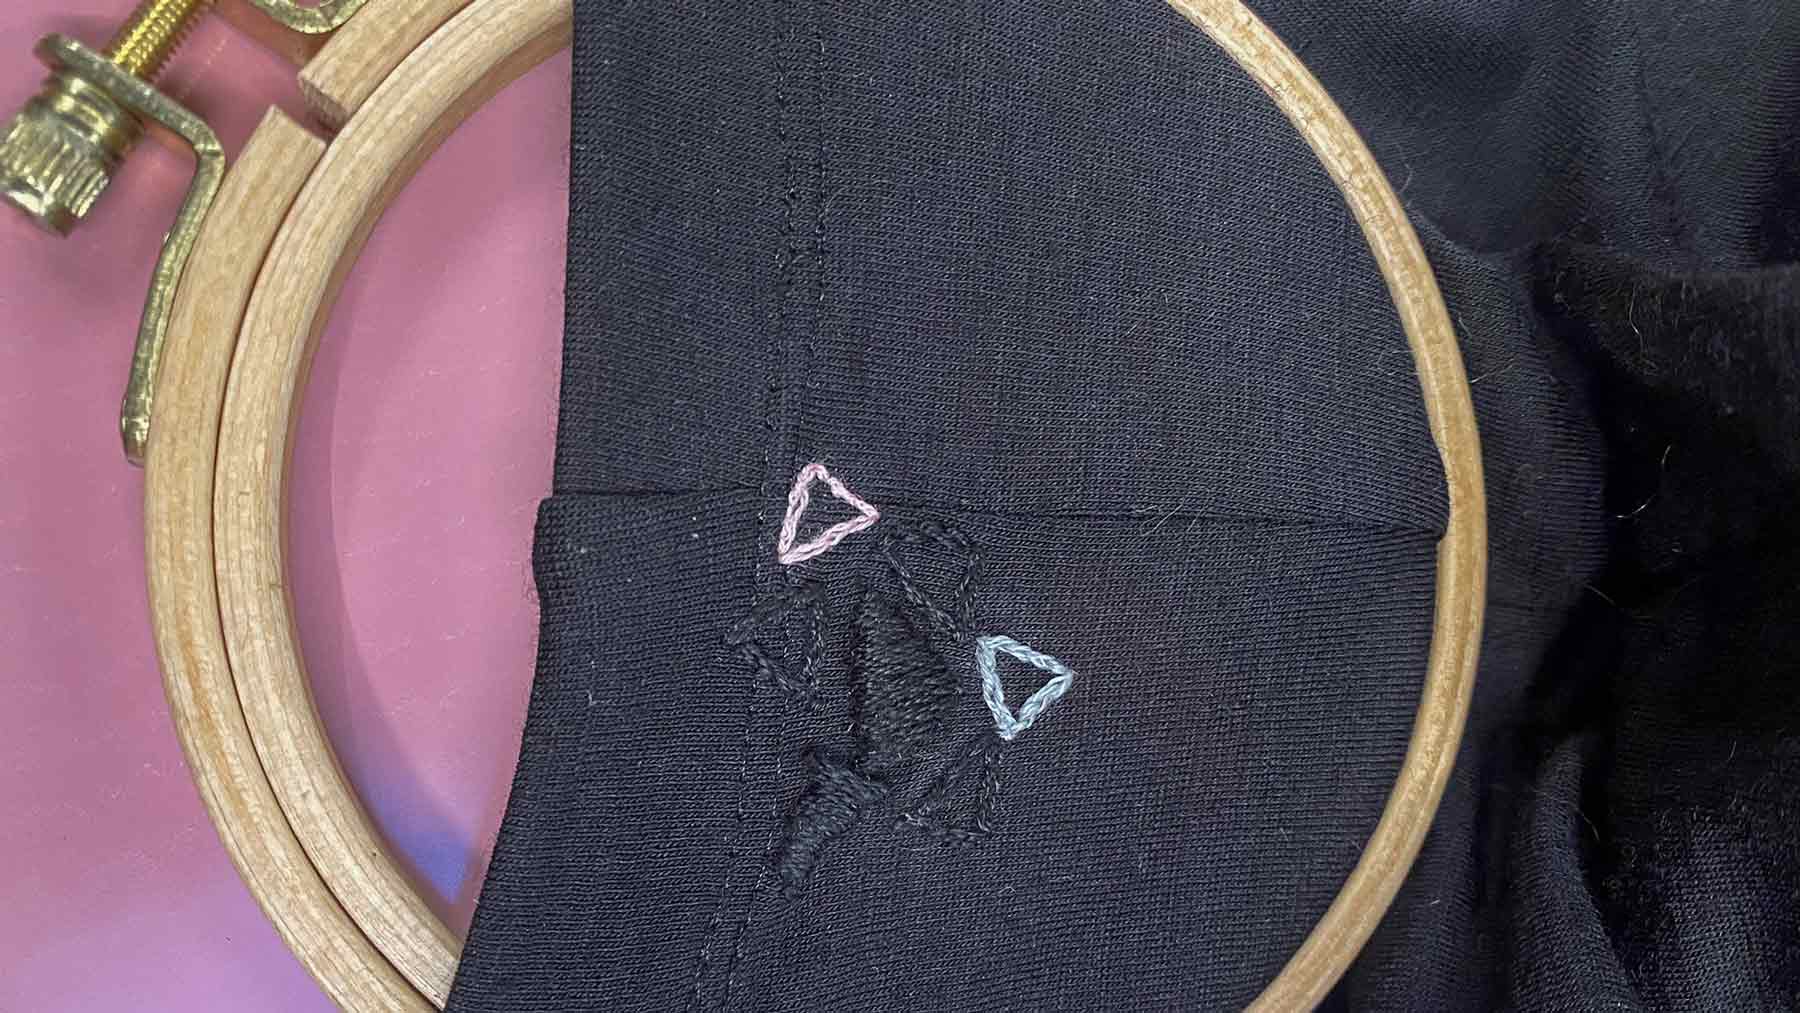 Close up of visible embroidery on a black top to mend a small hoe